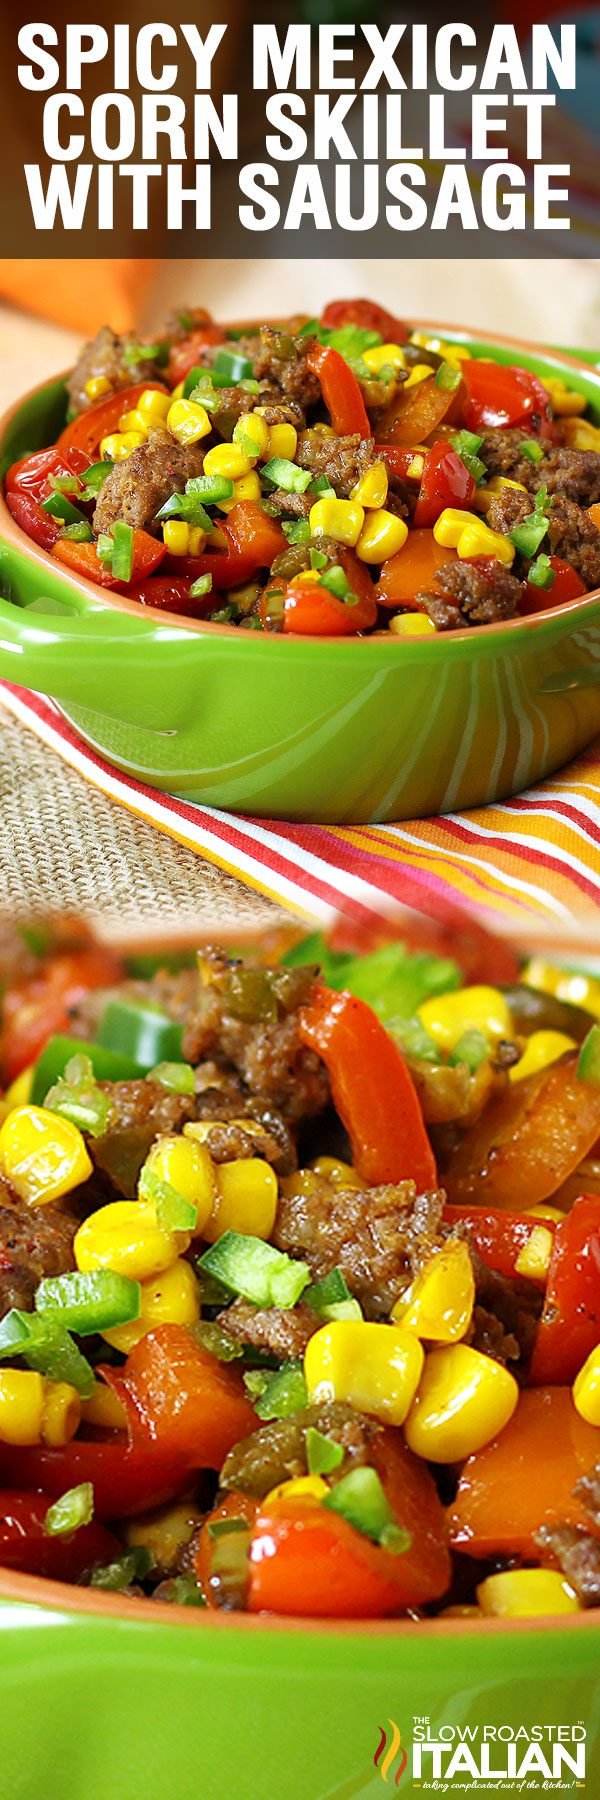 spicy mexican corn skillet with sausage -pin